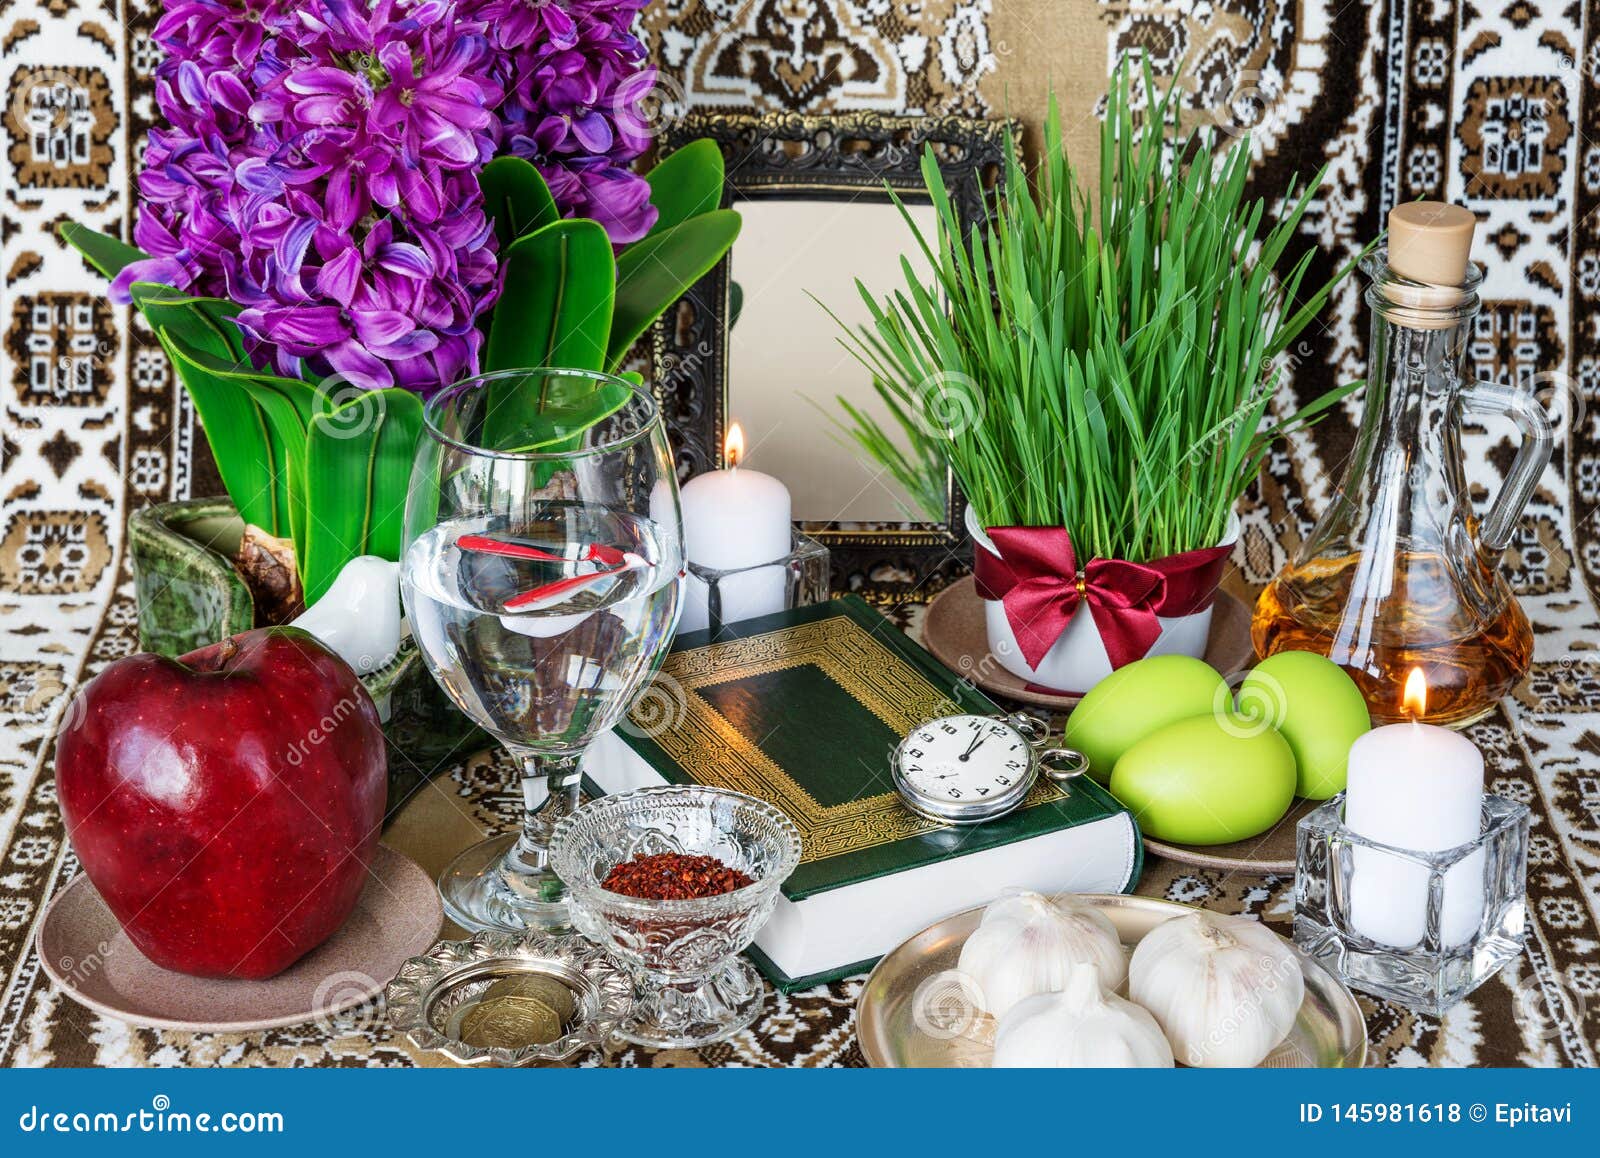 tabletop with haft-seen s for nowruz